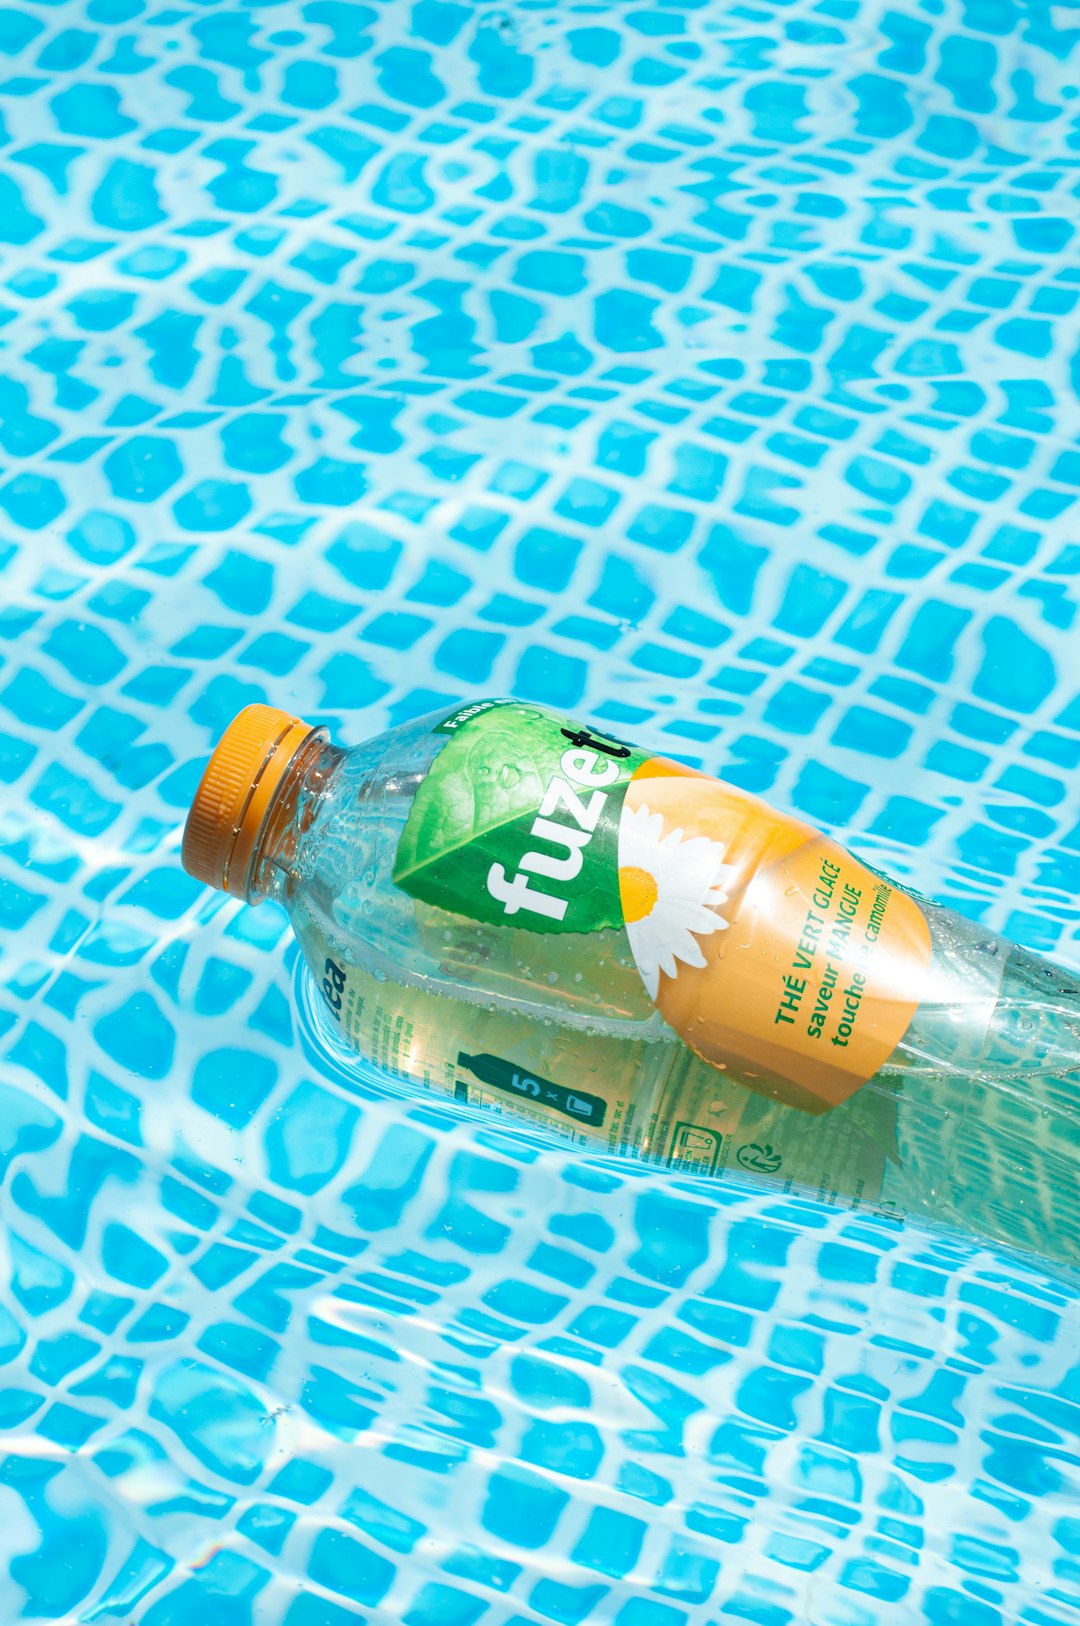 green labeled plastic bottle on blue and white polka dot textile